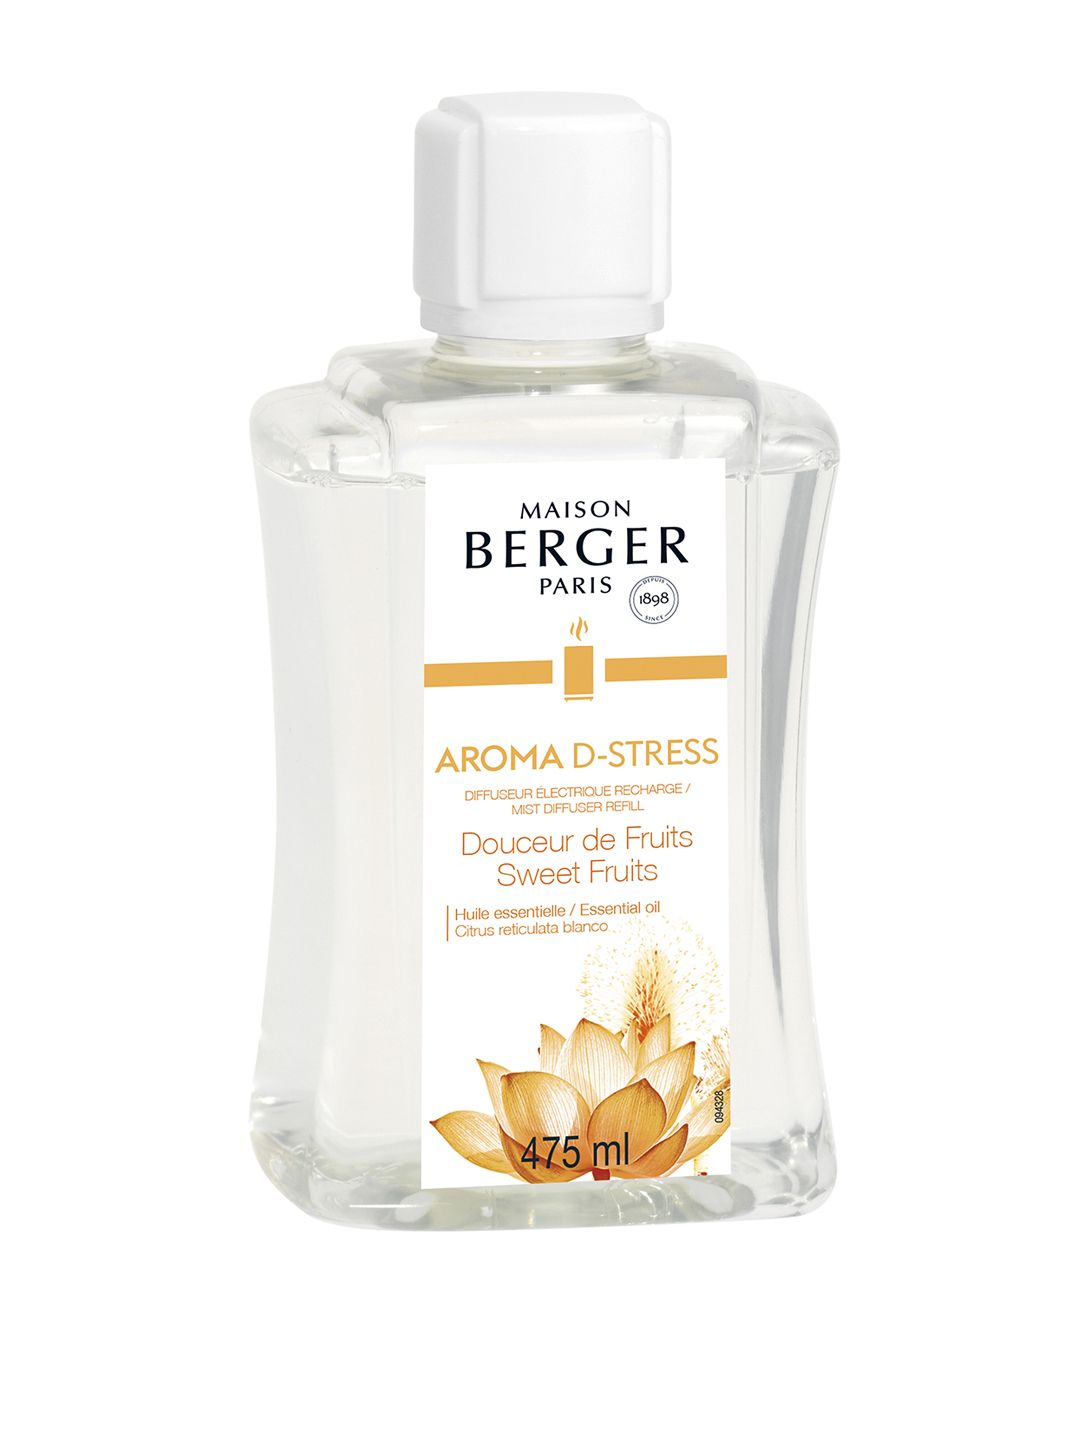 MAISON BERGER Aroma D Stress Refill 475ml Price in India